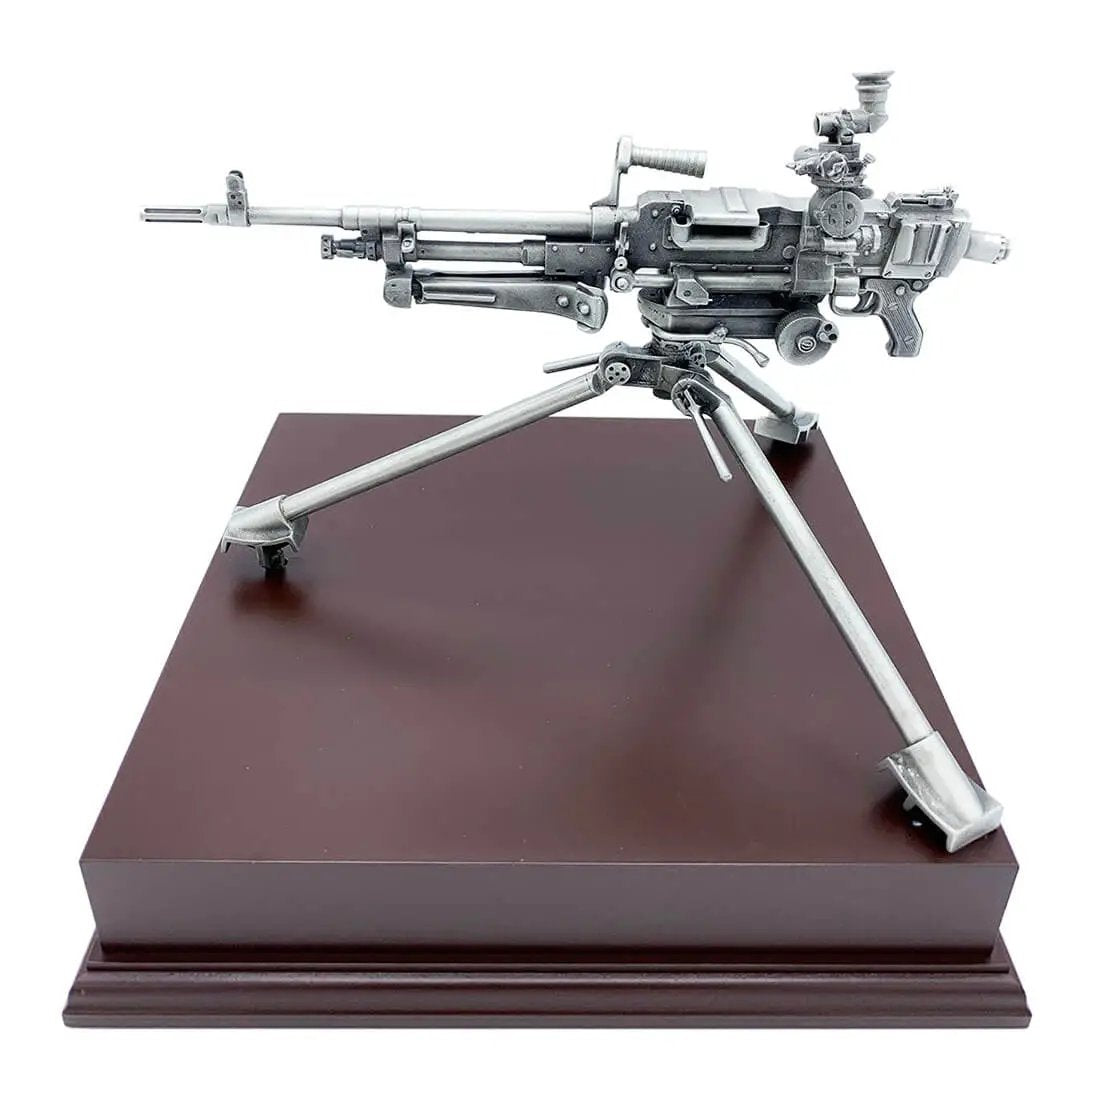 GPMG Standing Fire Pewter Statue - John Bull Clothing